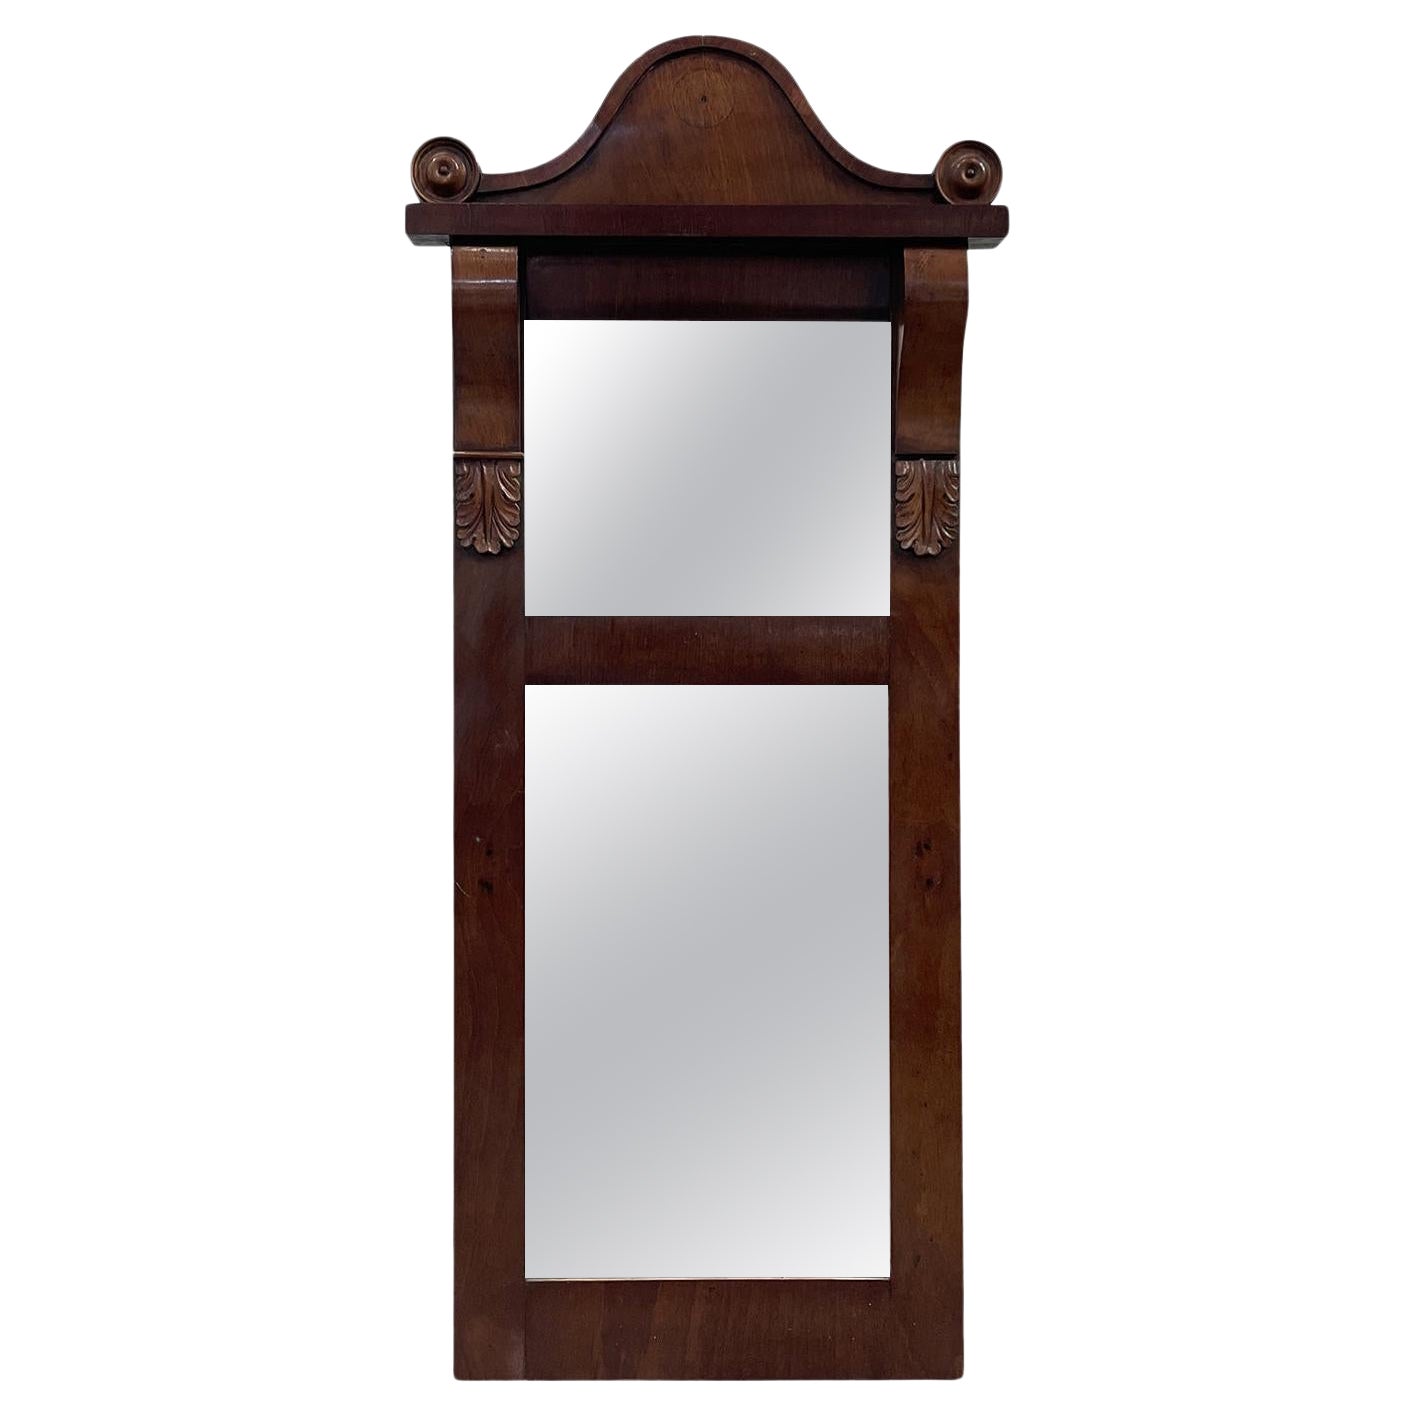 19th Century Baltic Polished Mahogany Wall Glass Mirror - Antique Décor For Sale